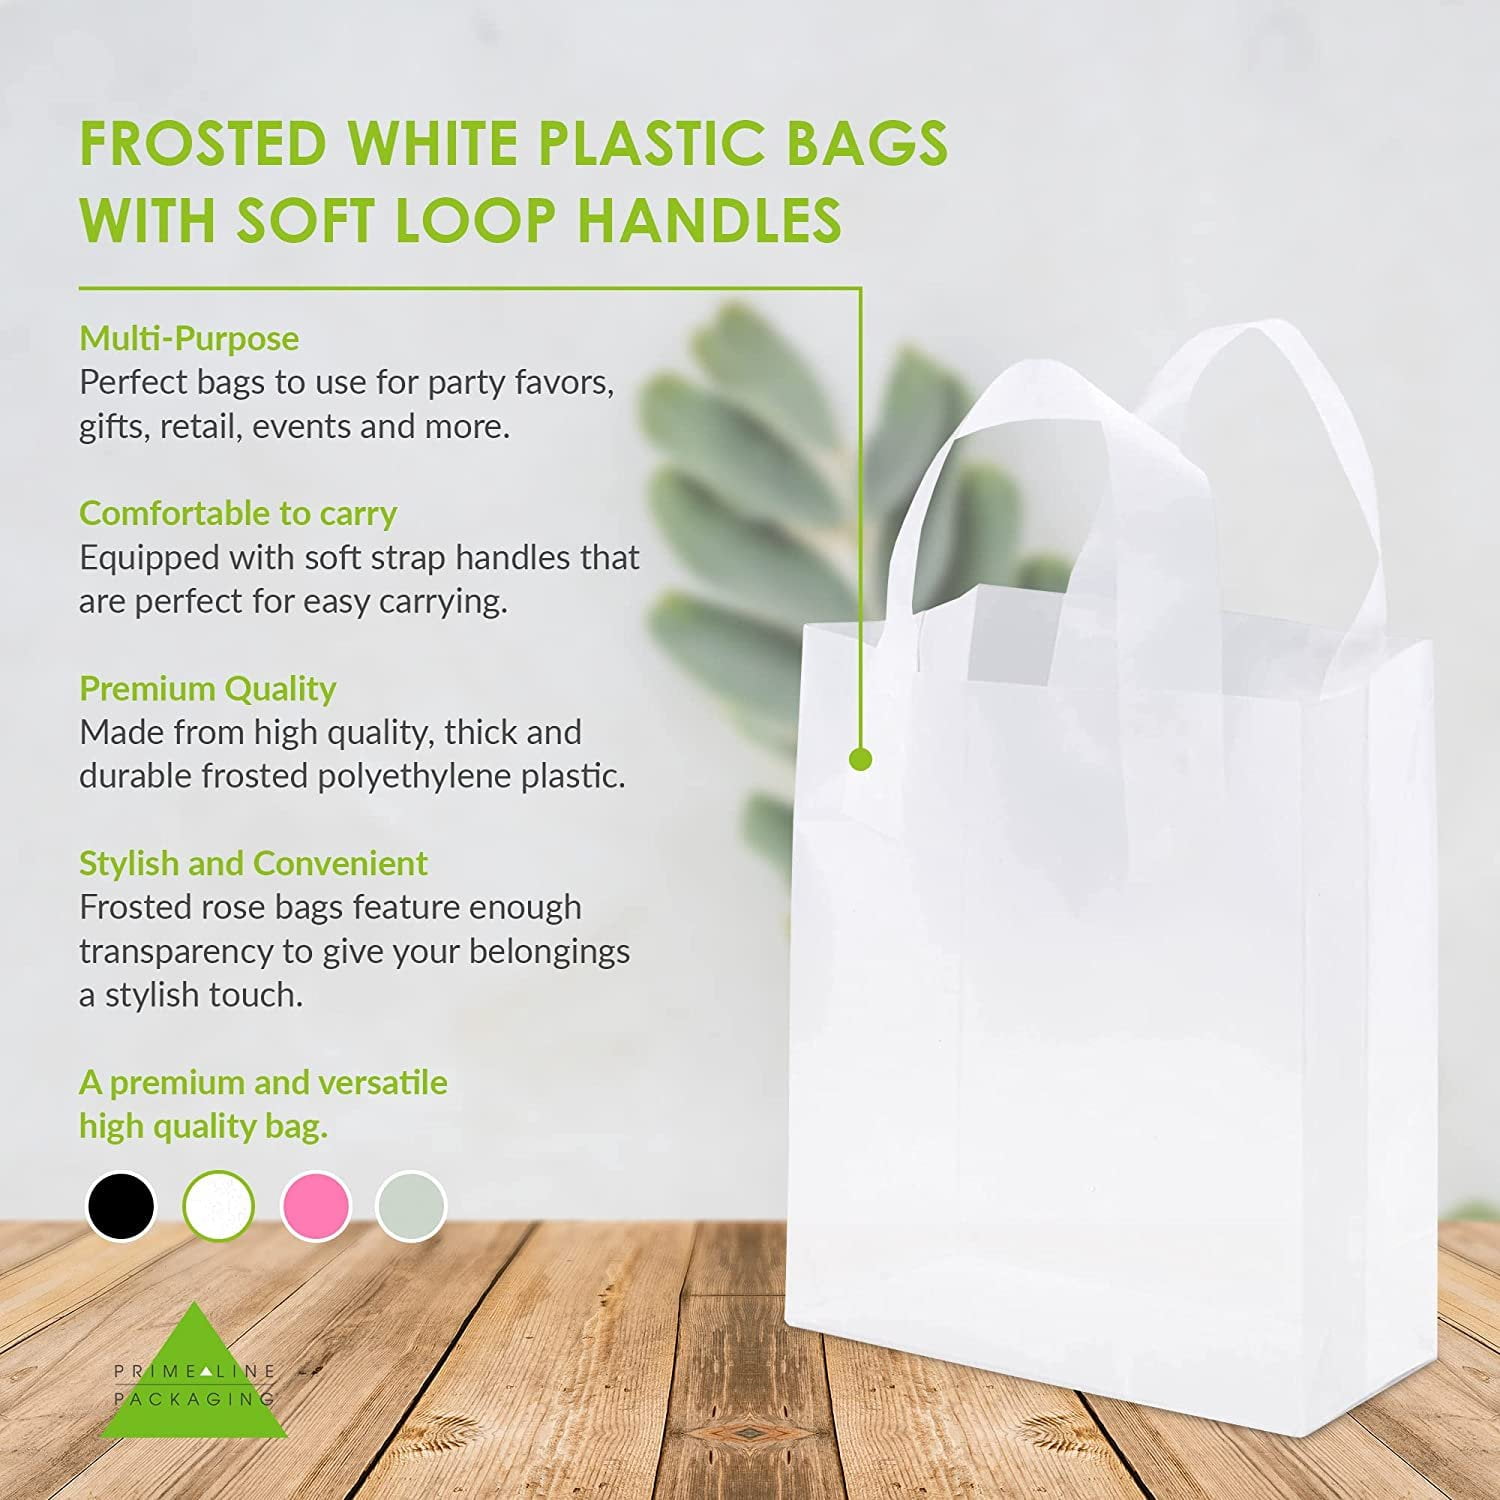 Prime Line Packaging Small Clear Plastic Bags with Soft Loop Handles Gifts  Bulk 50 Pcs 8x4x10, 50 Pcs - Harris Teeter